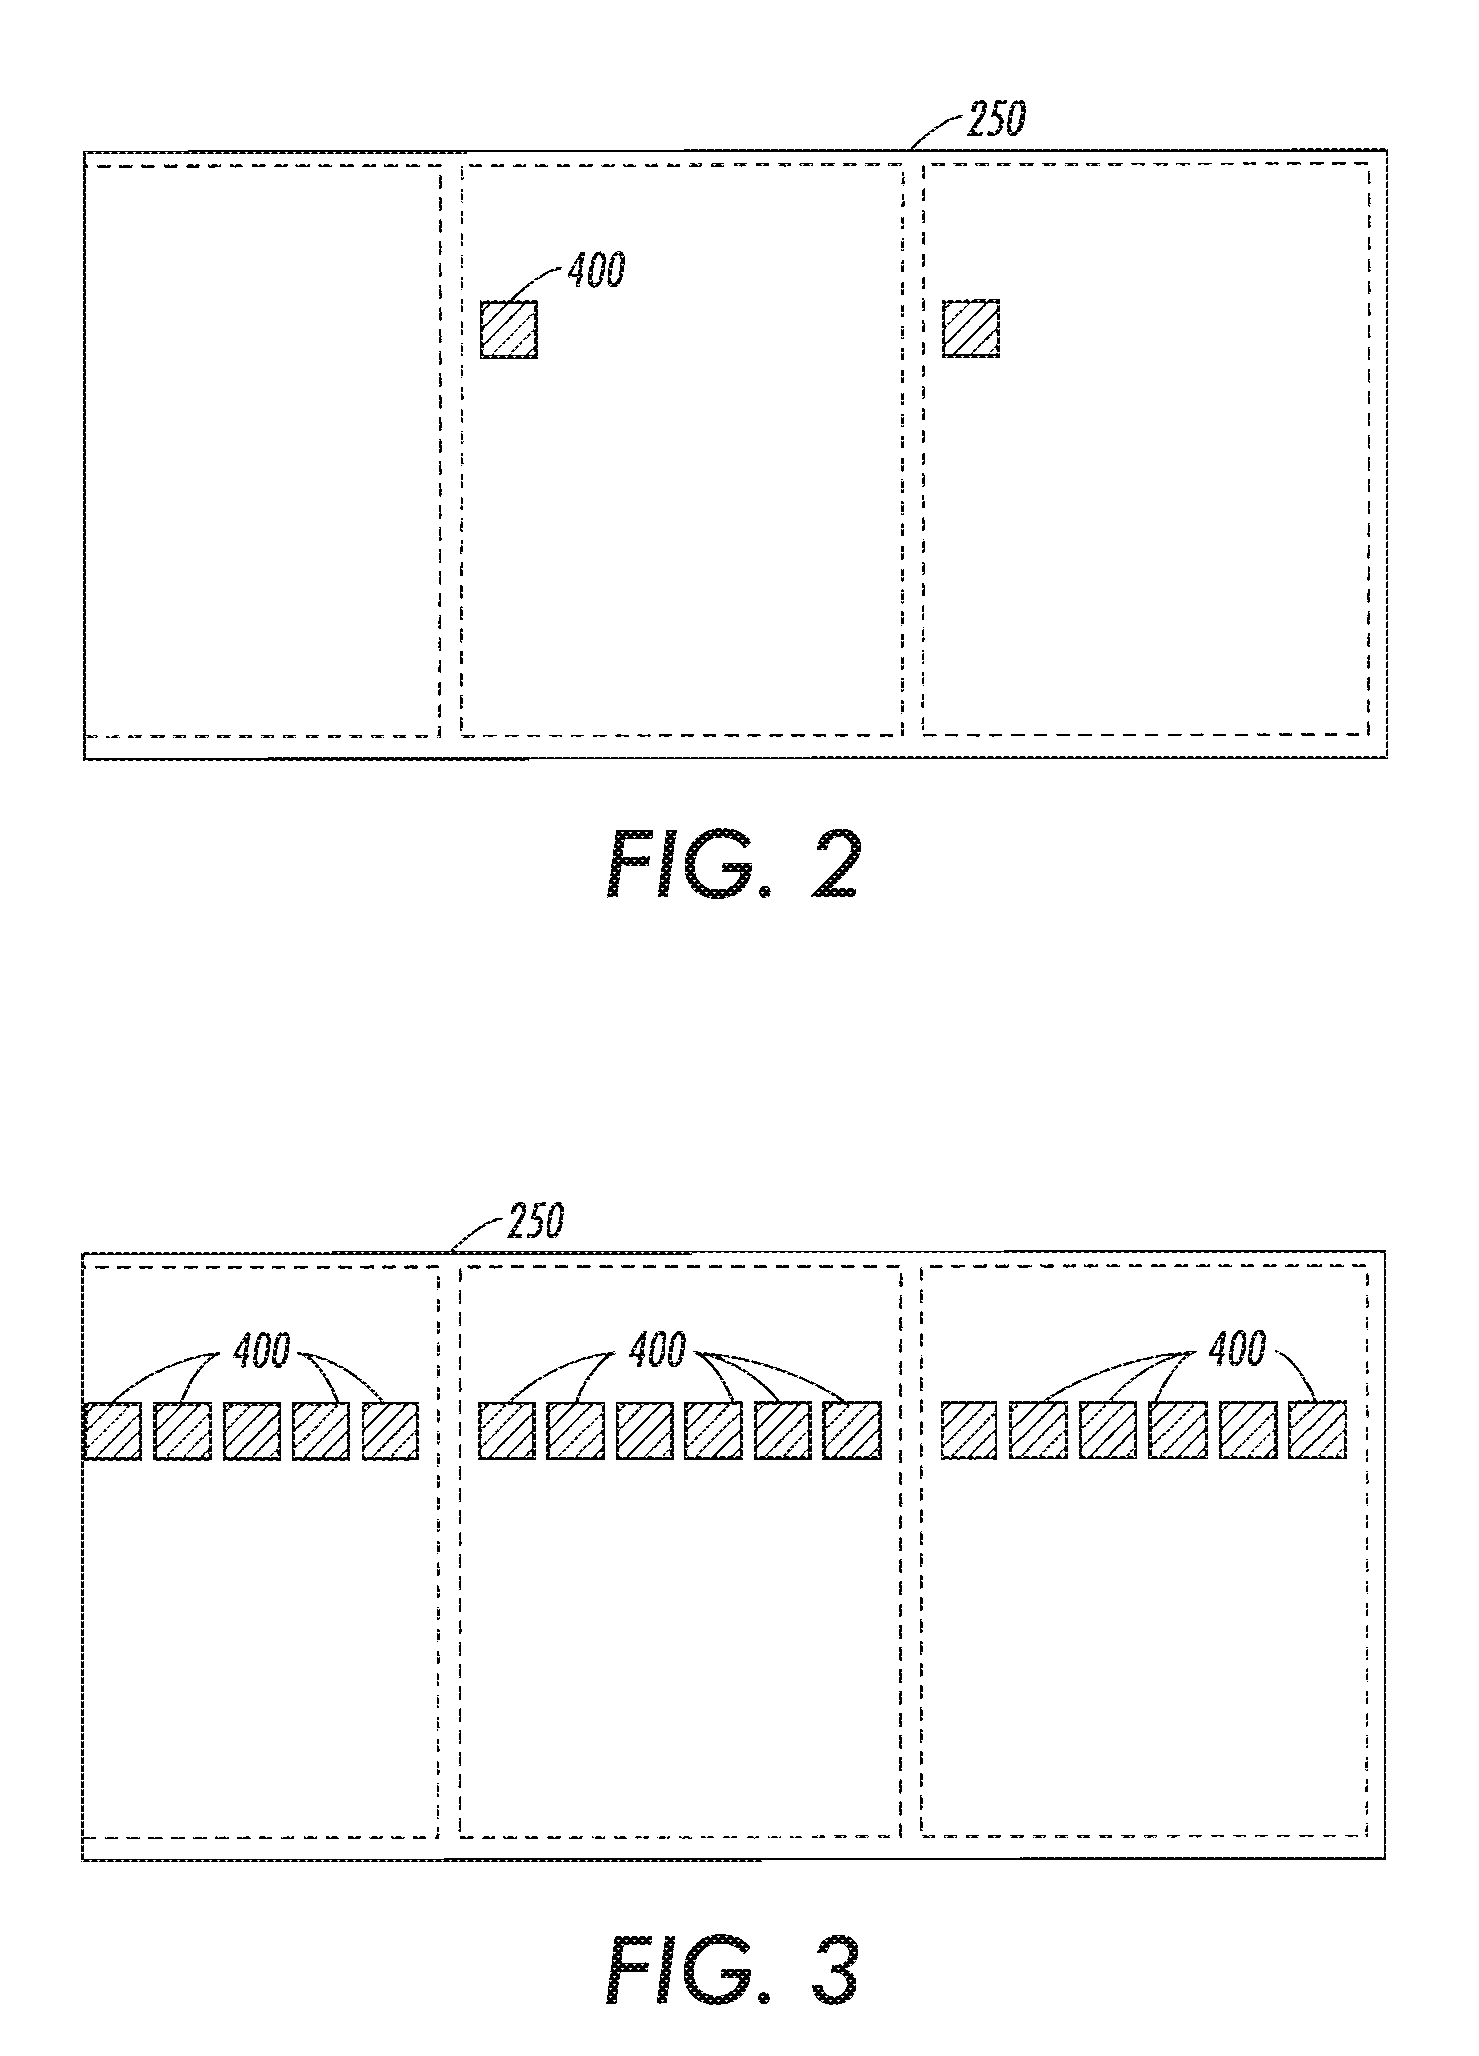 Method and apparatus for optimization of second transfer parameters